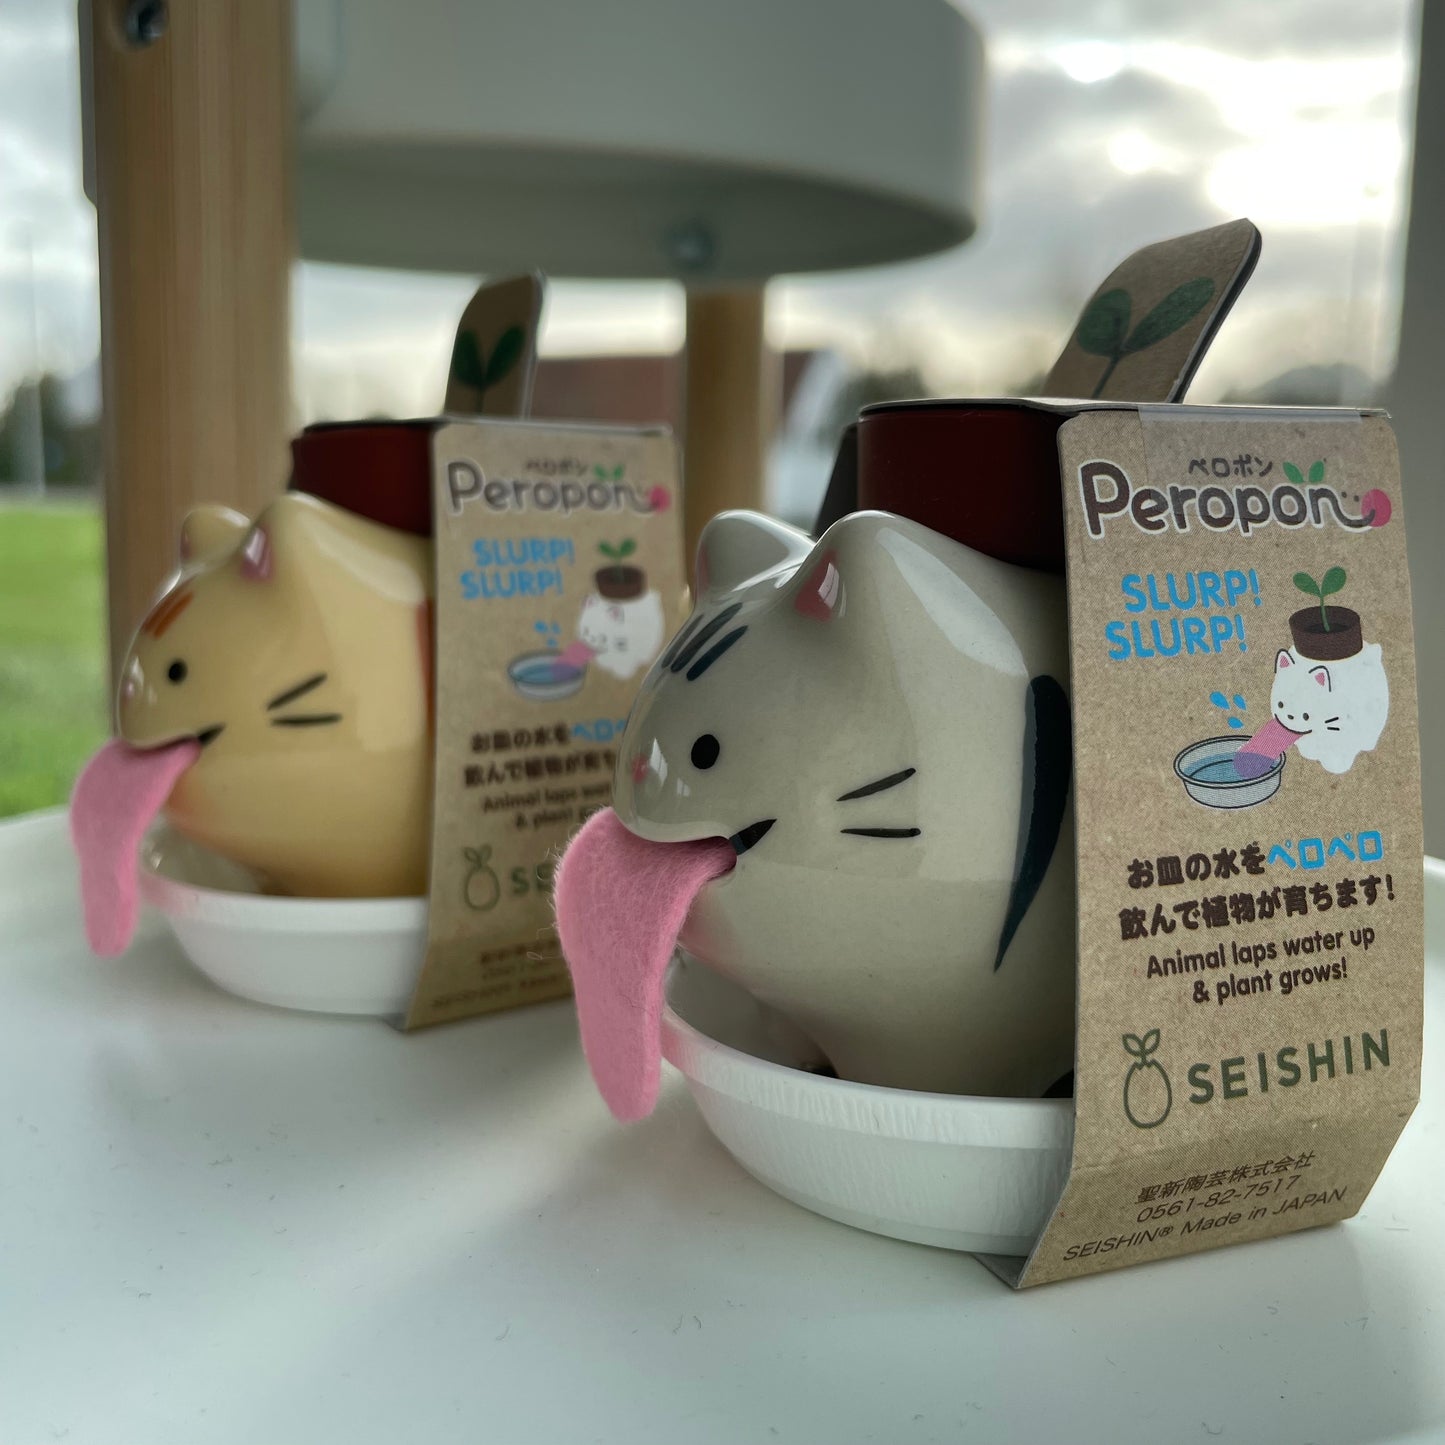 Peropon cats - Self-Watering Plant